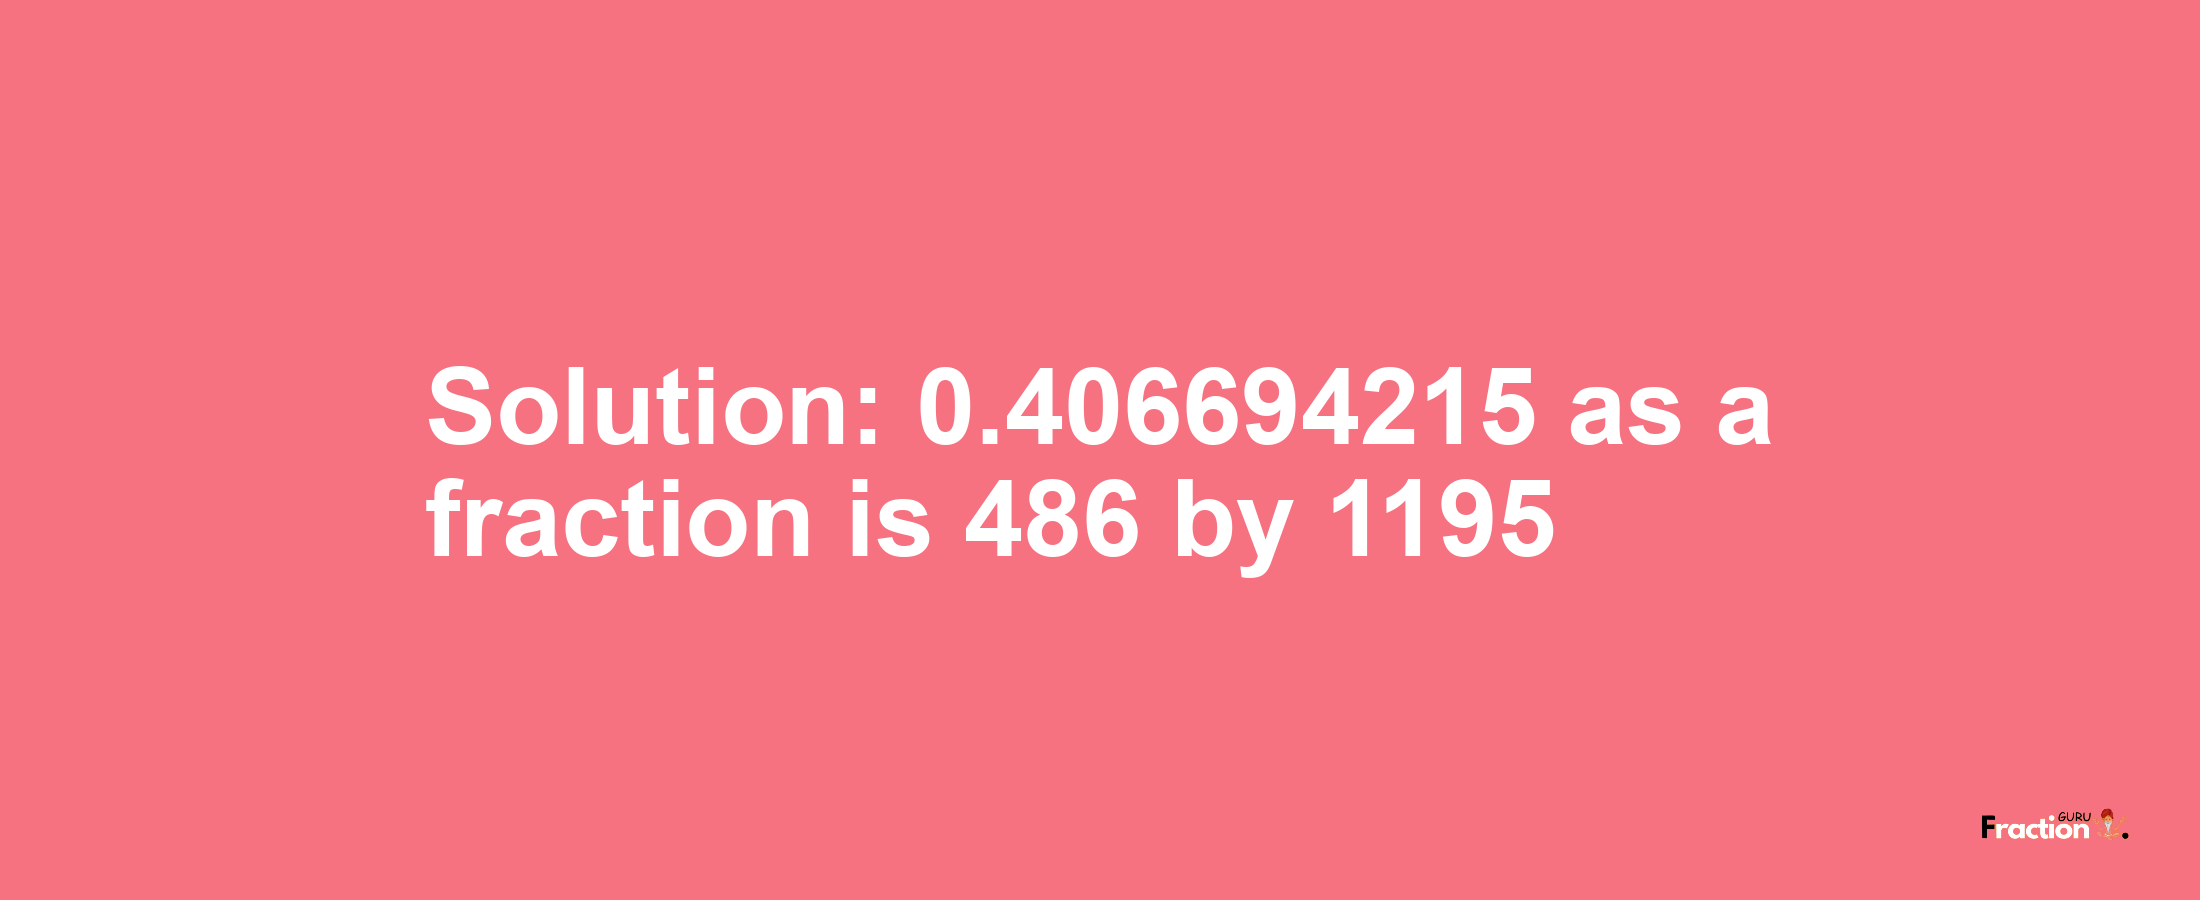 Solution:0.406694215 as a fraction is 486/1195